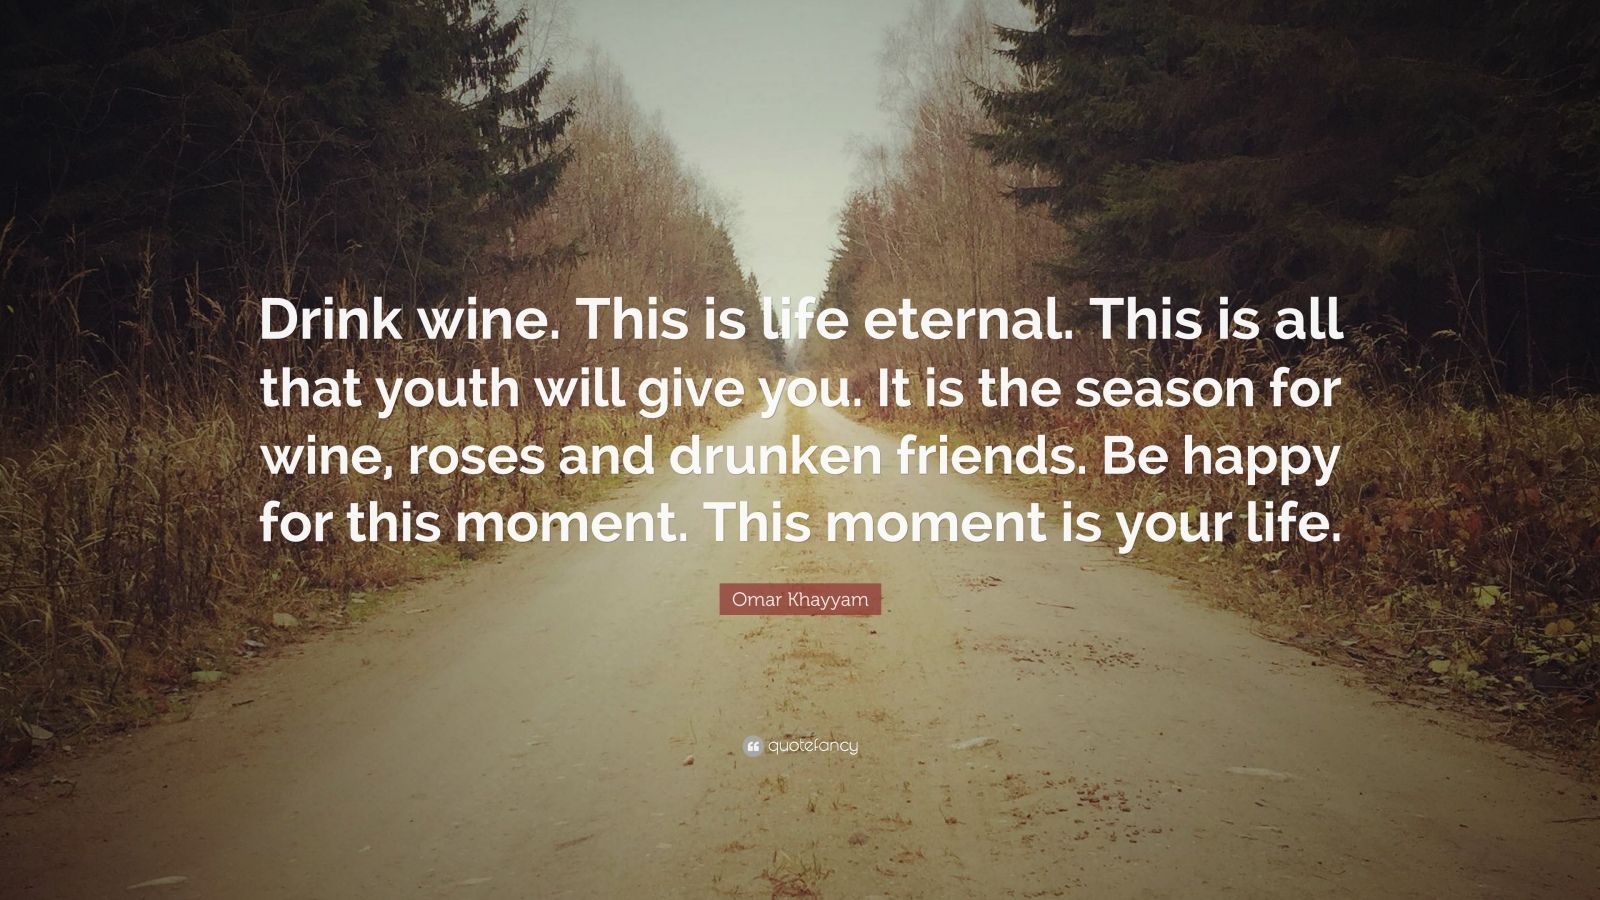 Omar Khayyam Quote: “Drink wine. This is life eternal ...